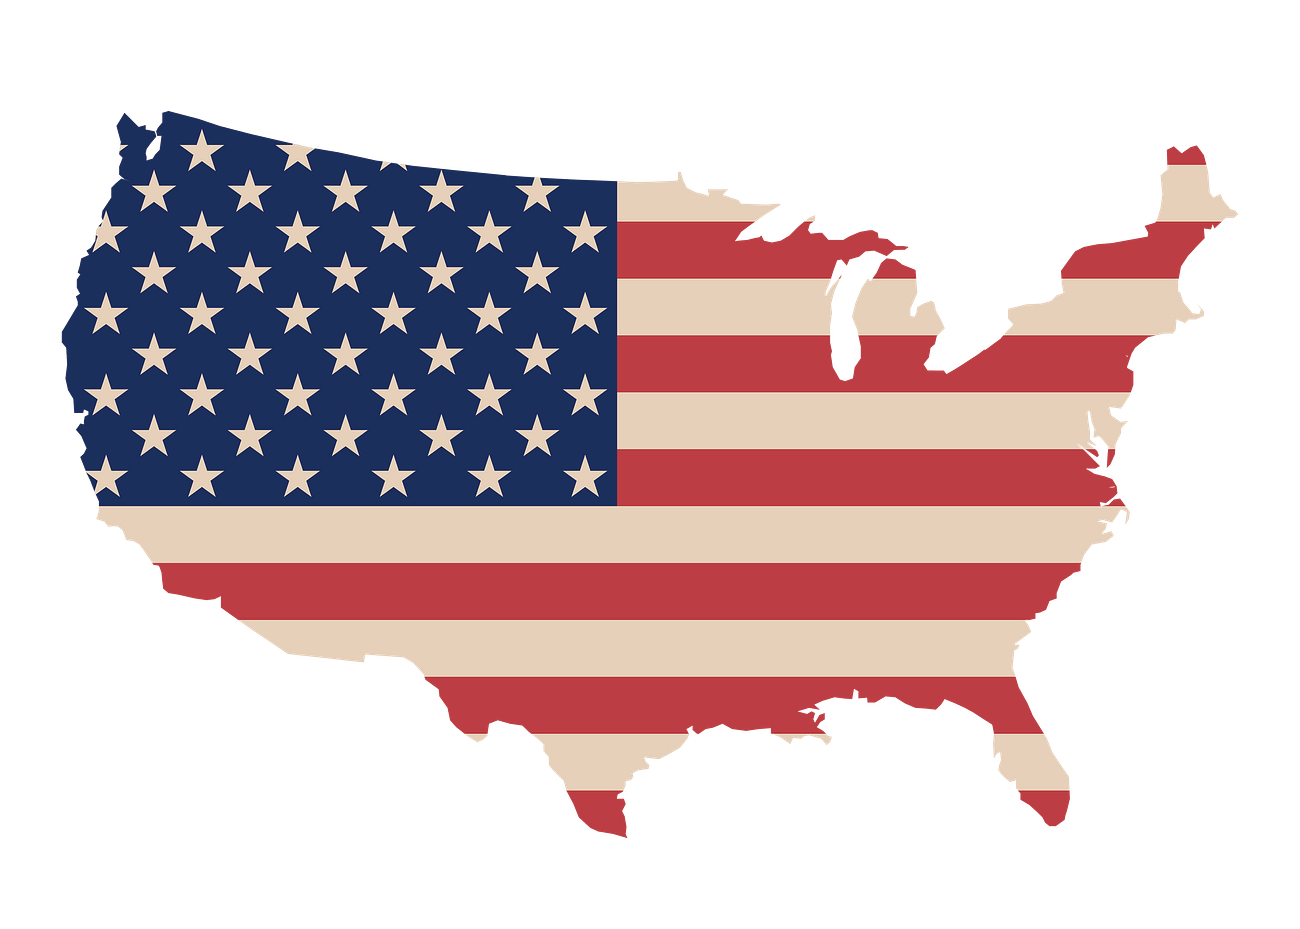 List of states in USA